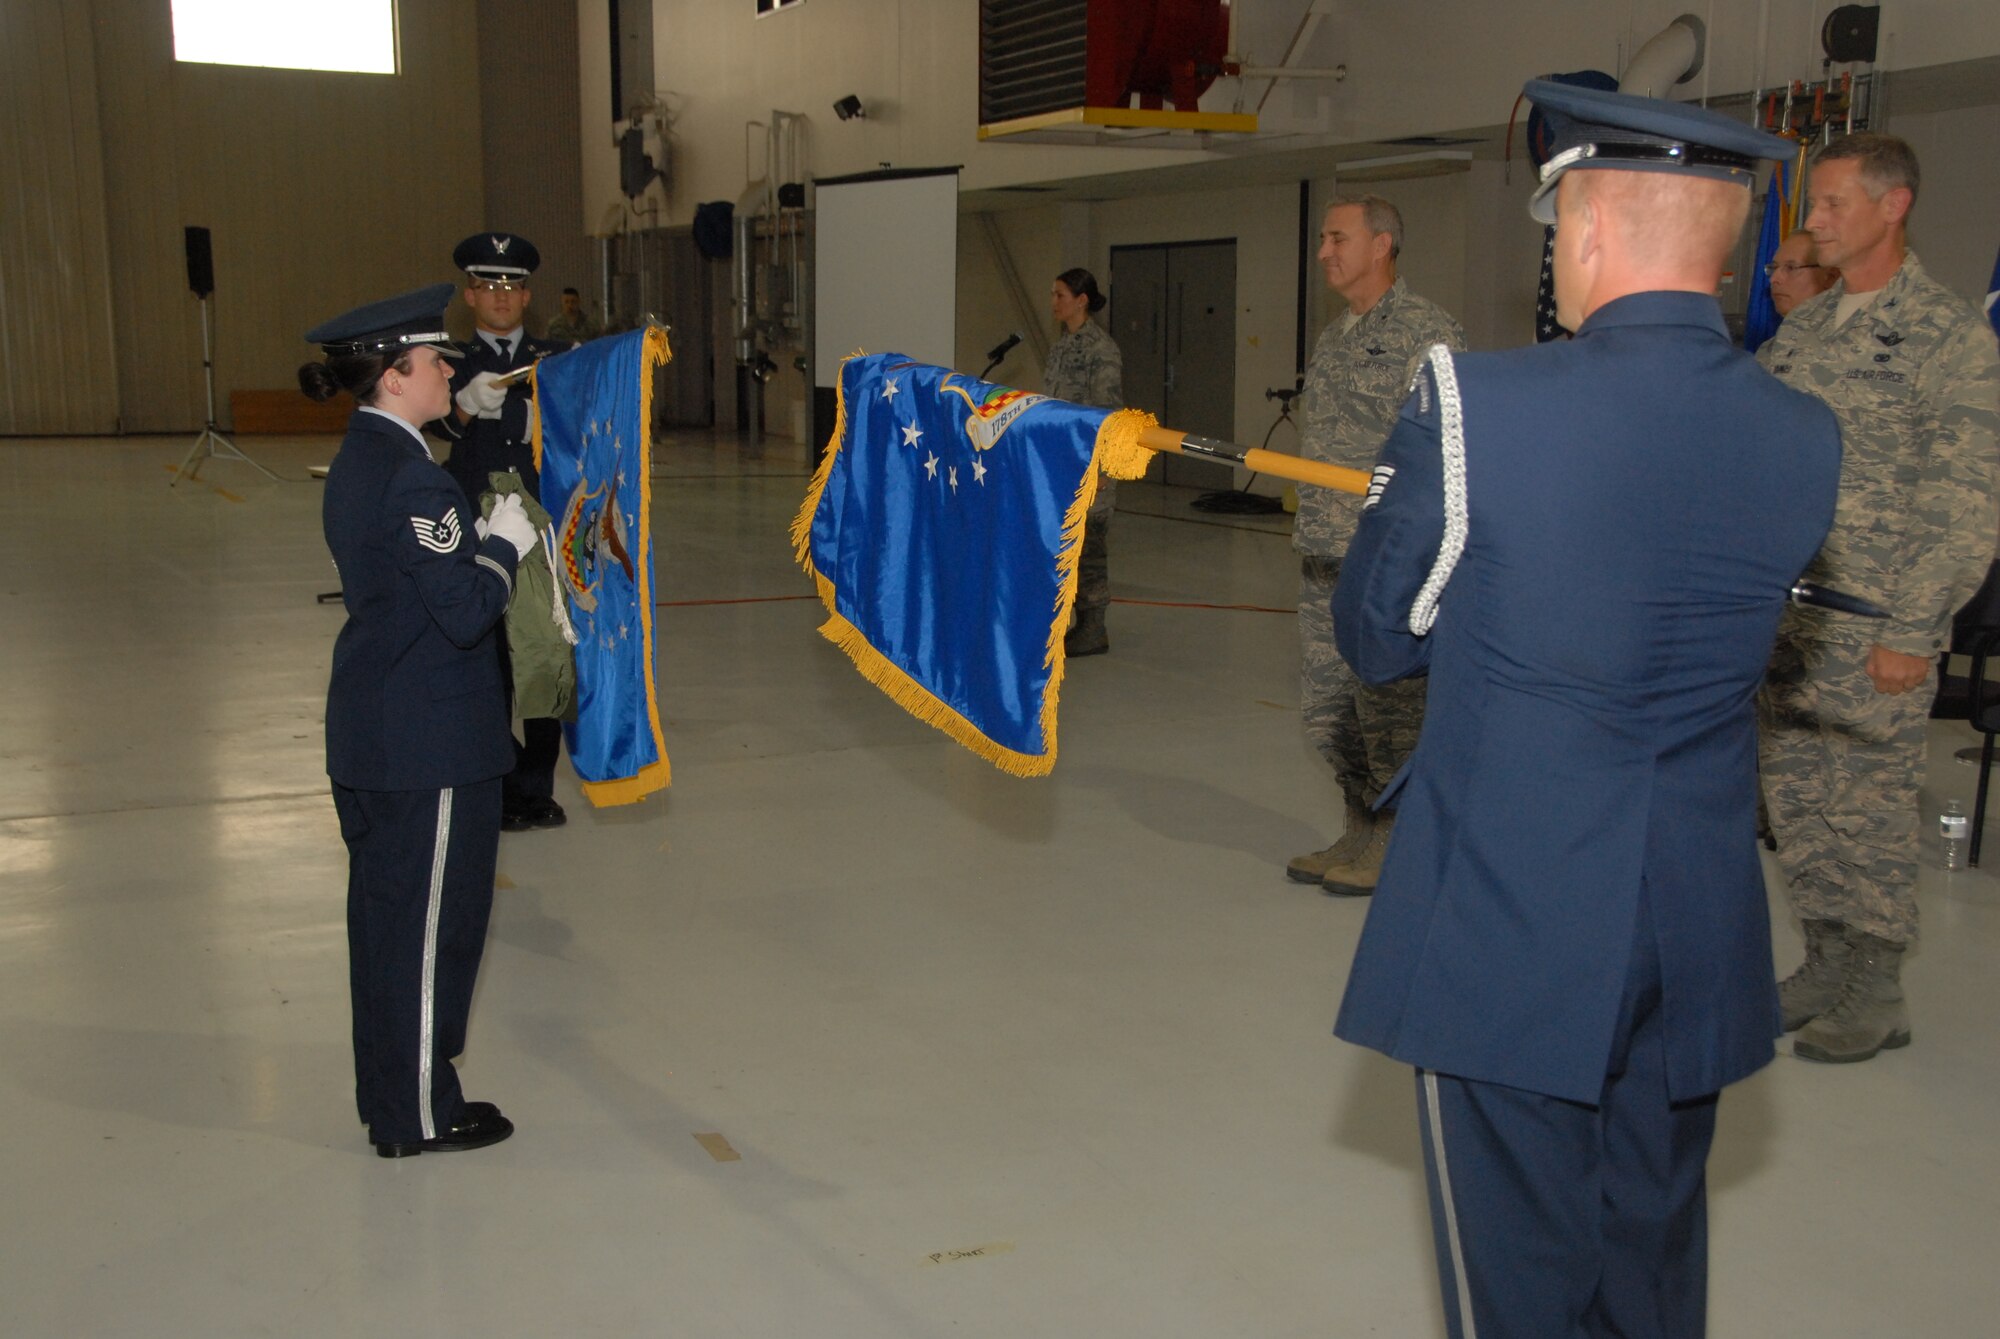 The 178th Honor Guard furls the 178th Fighter Wing Flag and unfurls the 178th Wing flag symbolizing the wings mission transition during a redesignation ceremony at the Springfield Air National Guard Base, Aug 3. While the name change was official July 1, the ceremony reflected a four-year conversion from the 178th FW that supported a flying mission to the 178th Wing, which now has intelligence, surveillance, reconnaissance and support missions. (Ohio Air National Guard photo by Master Sgt. Seth Skidmore/Released)